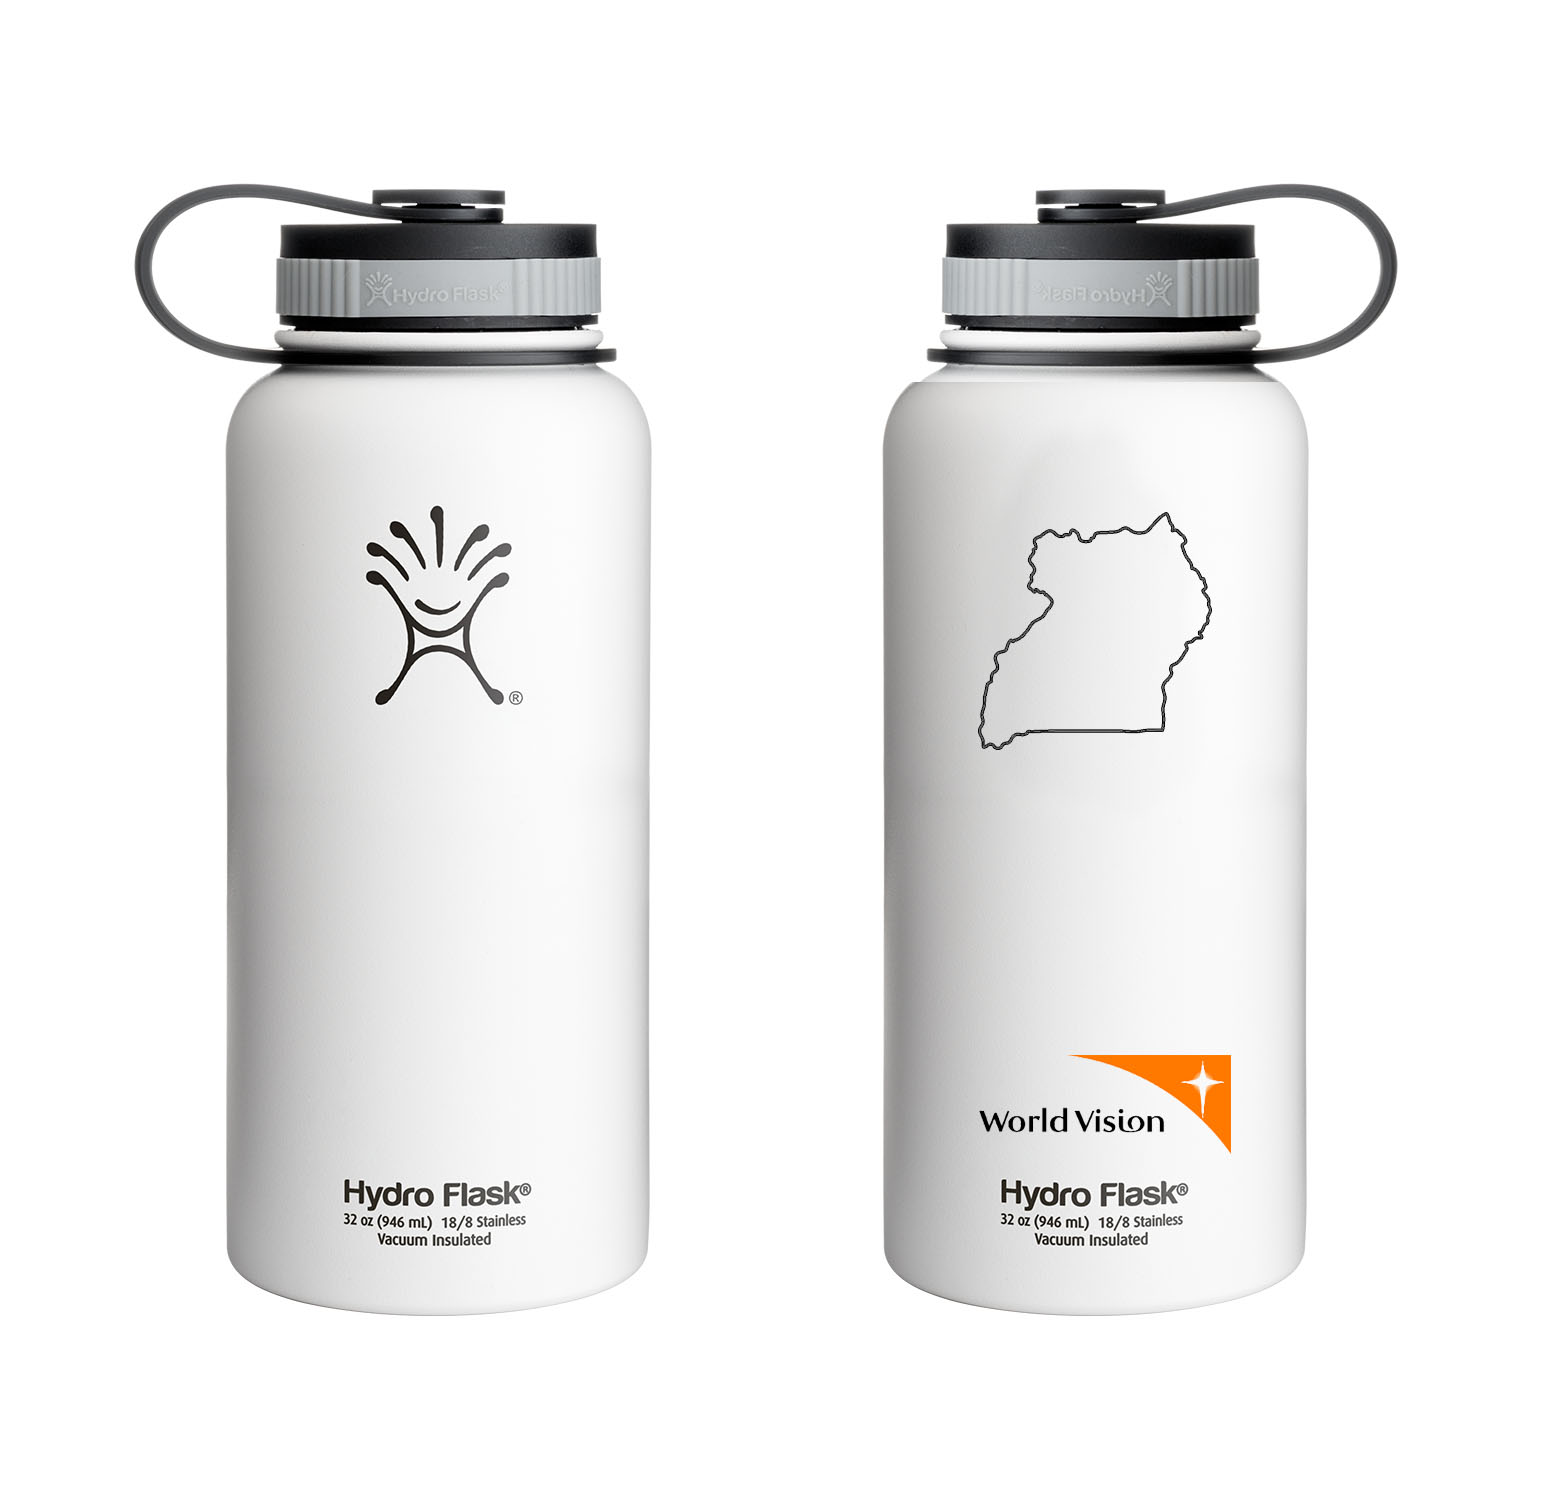 Available now, Hydro Flask will be donating 10% of its proceeds from